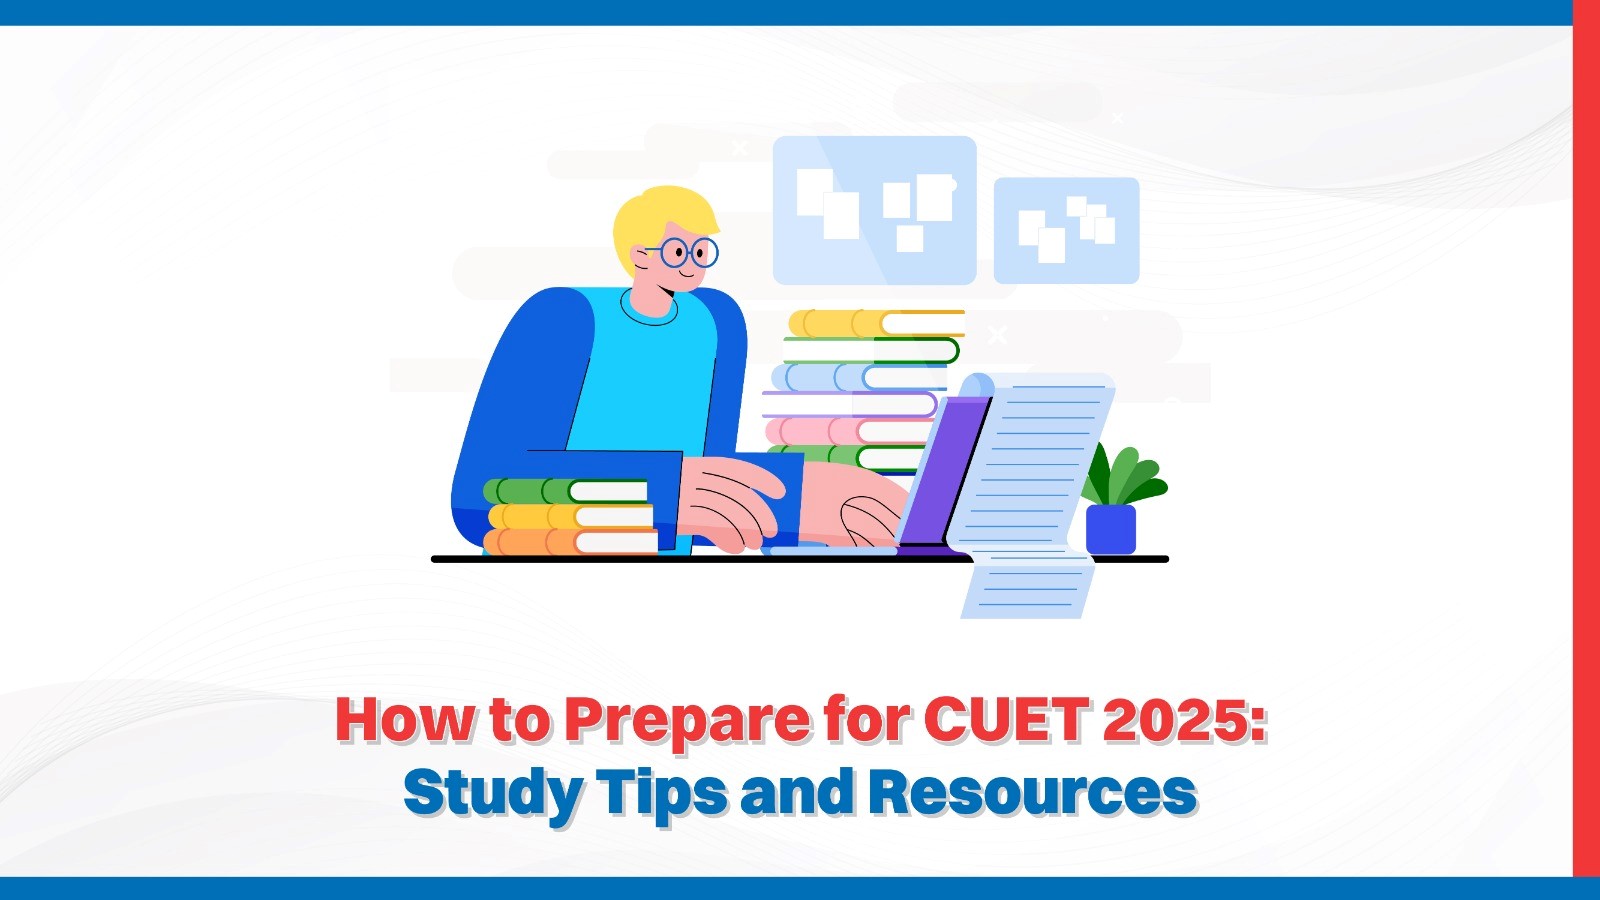 How to Prepare for CUET 2025 Study Tips and Resources.jpg